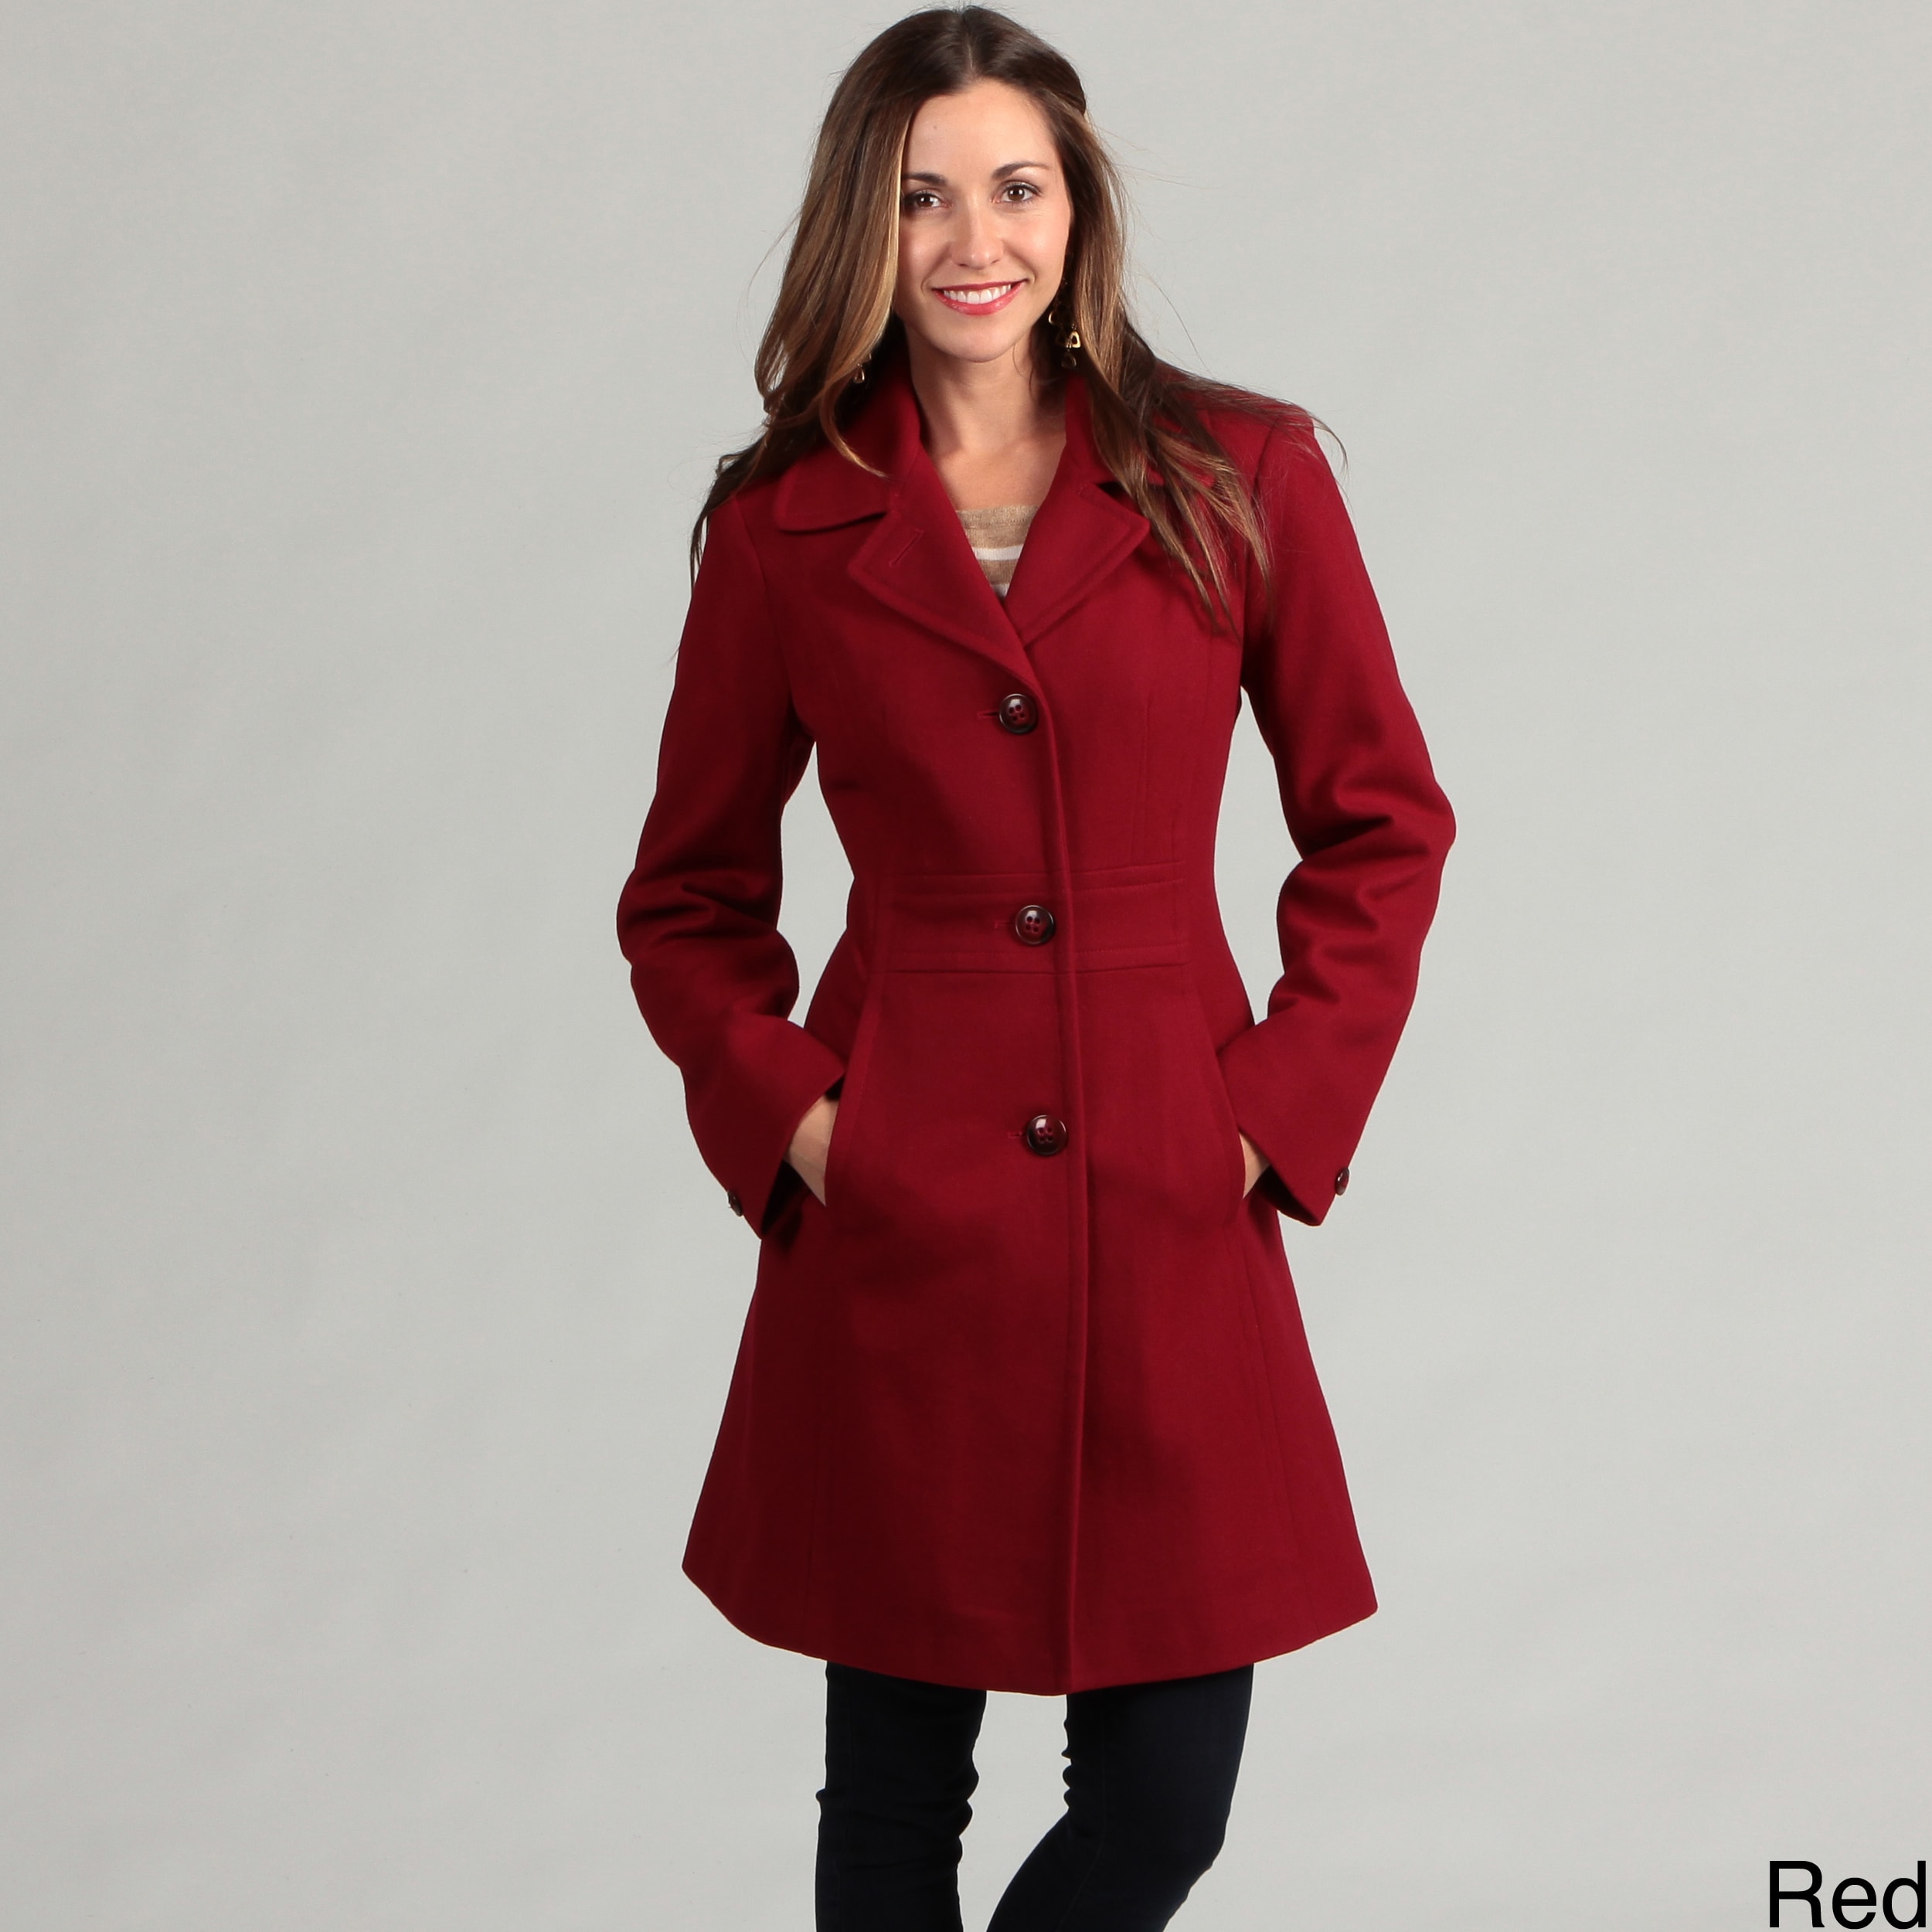 London Fog Women's Wool Blend Coat - Overstock™ Shopping - Top Rated ...